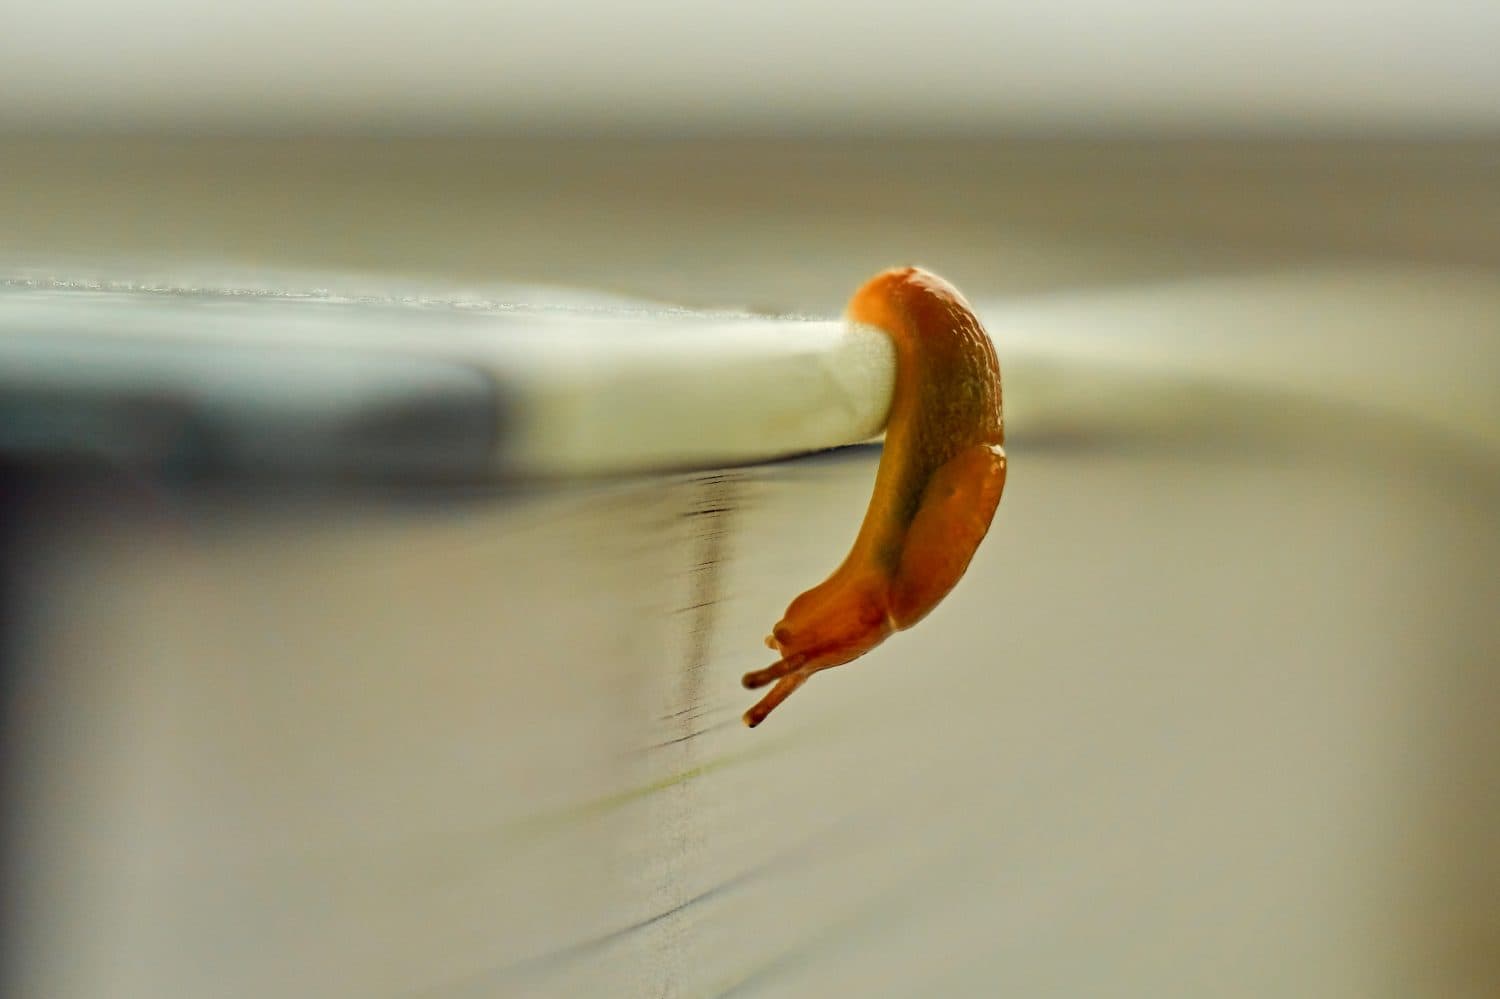 A macro shot of a small slug leaning over the side of a book